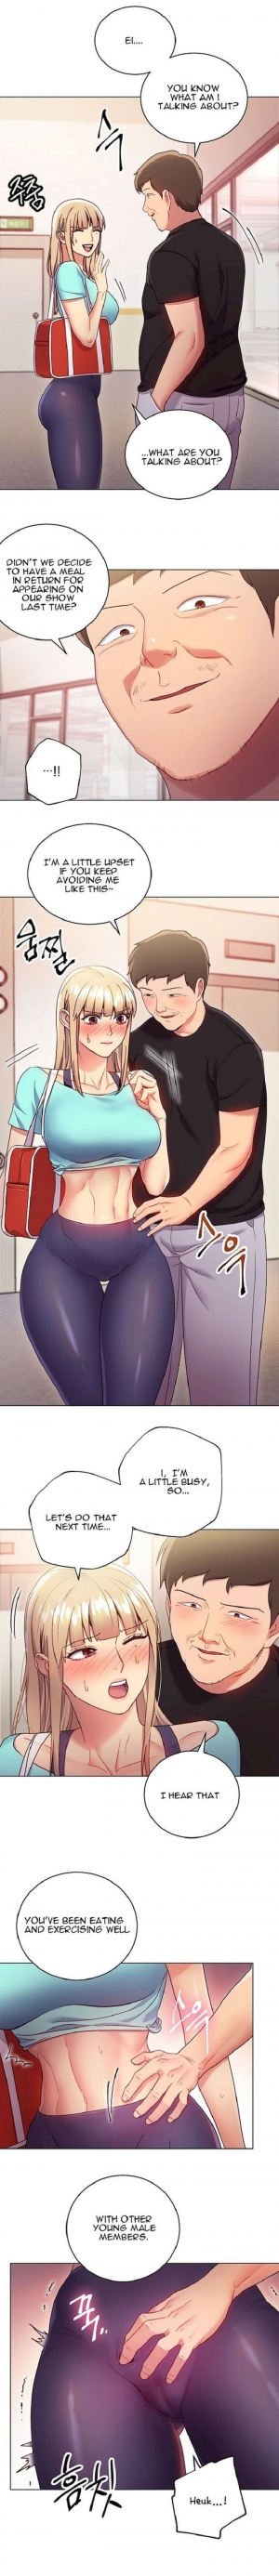 [Neck Pilllow] Stepmother Friends Ch.29/? [English] [Hentai Universe] - Page 151